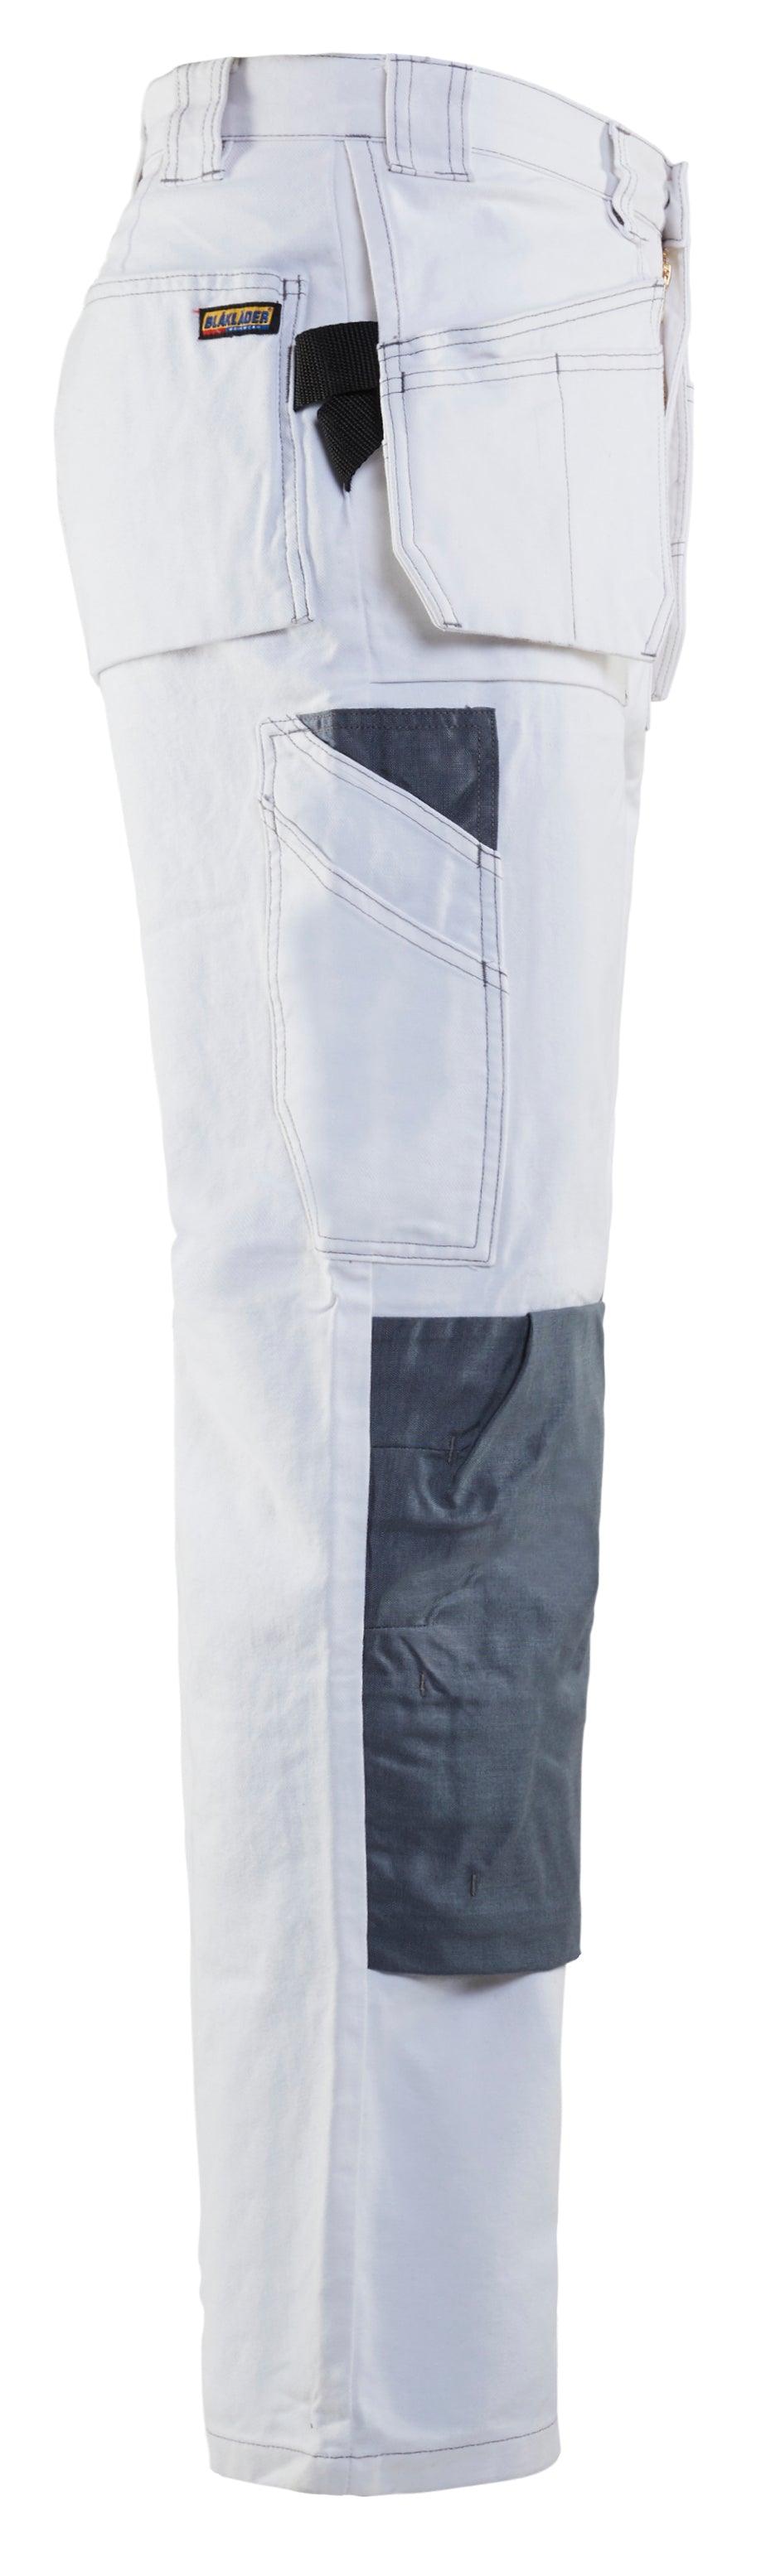 Blaklader 1631 9oz Cotton Painter Pants with Utility Pockets - White - Trusted Gear Company LLC